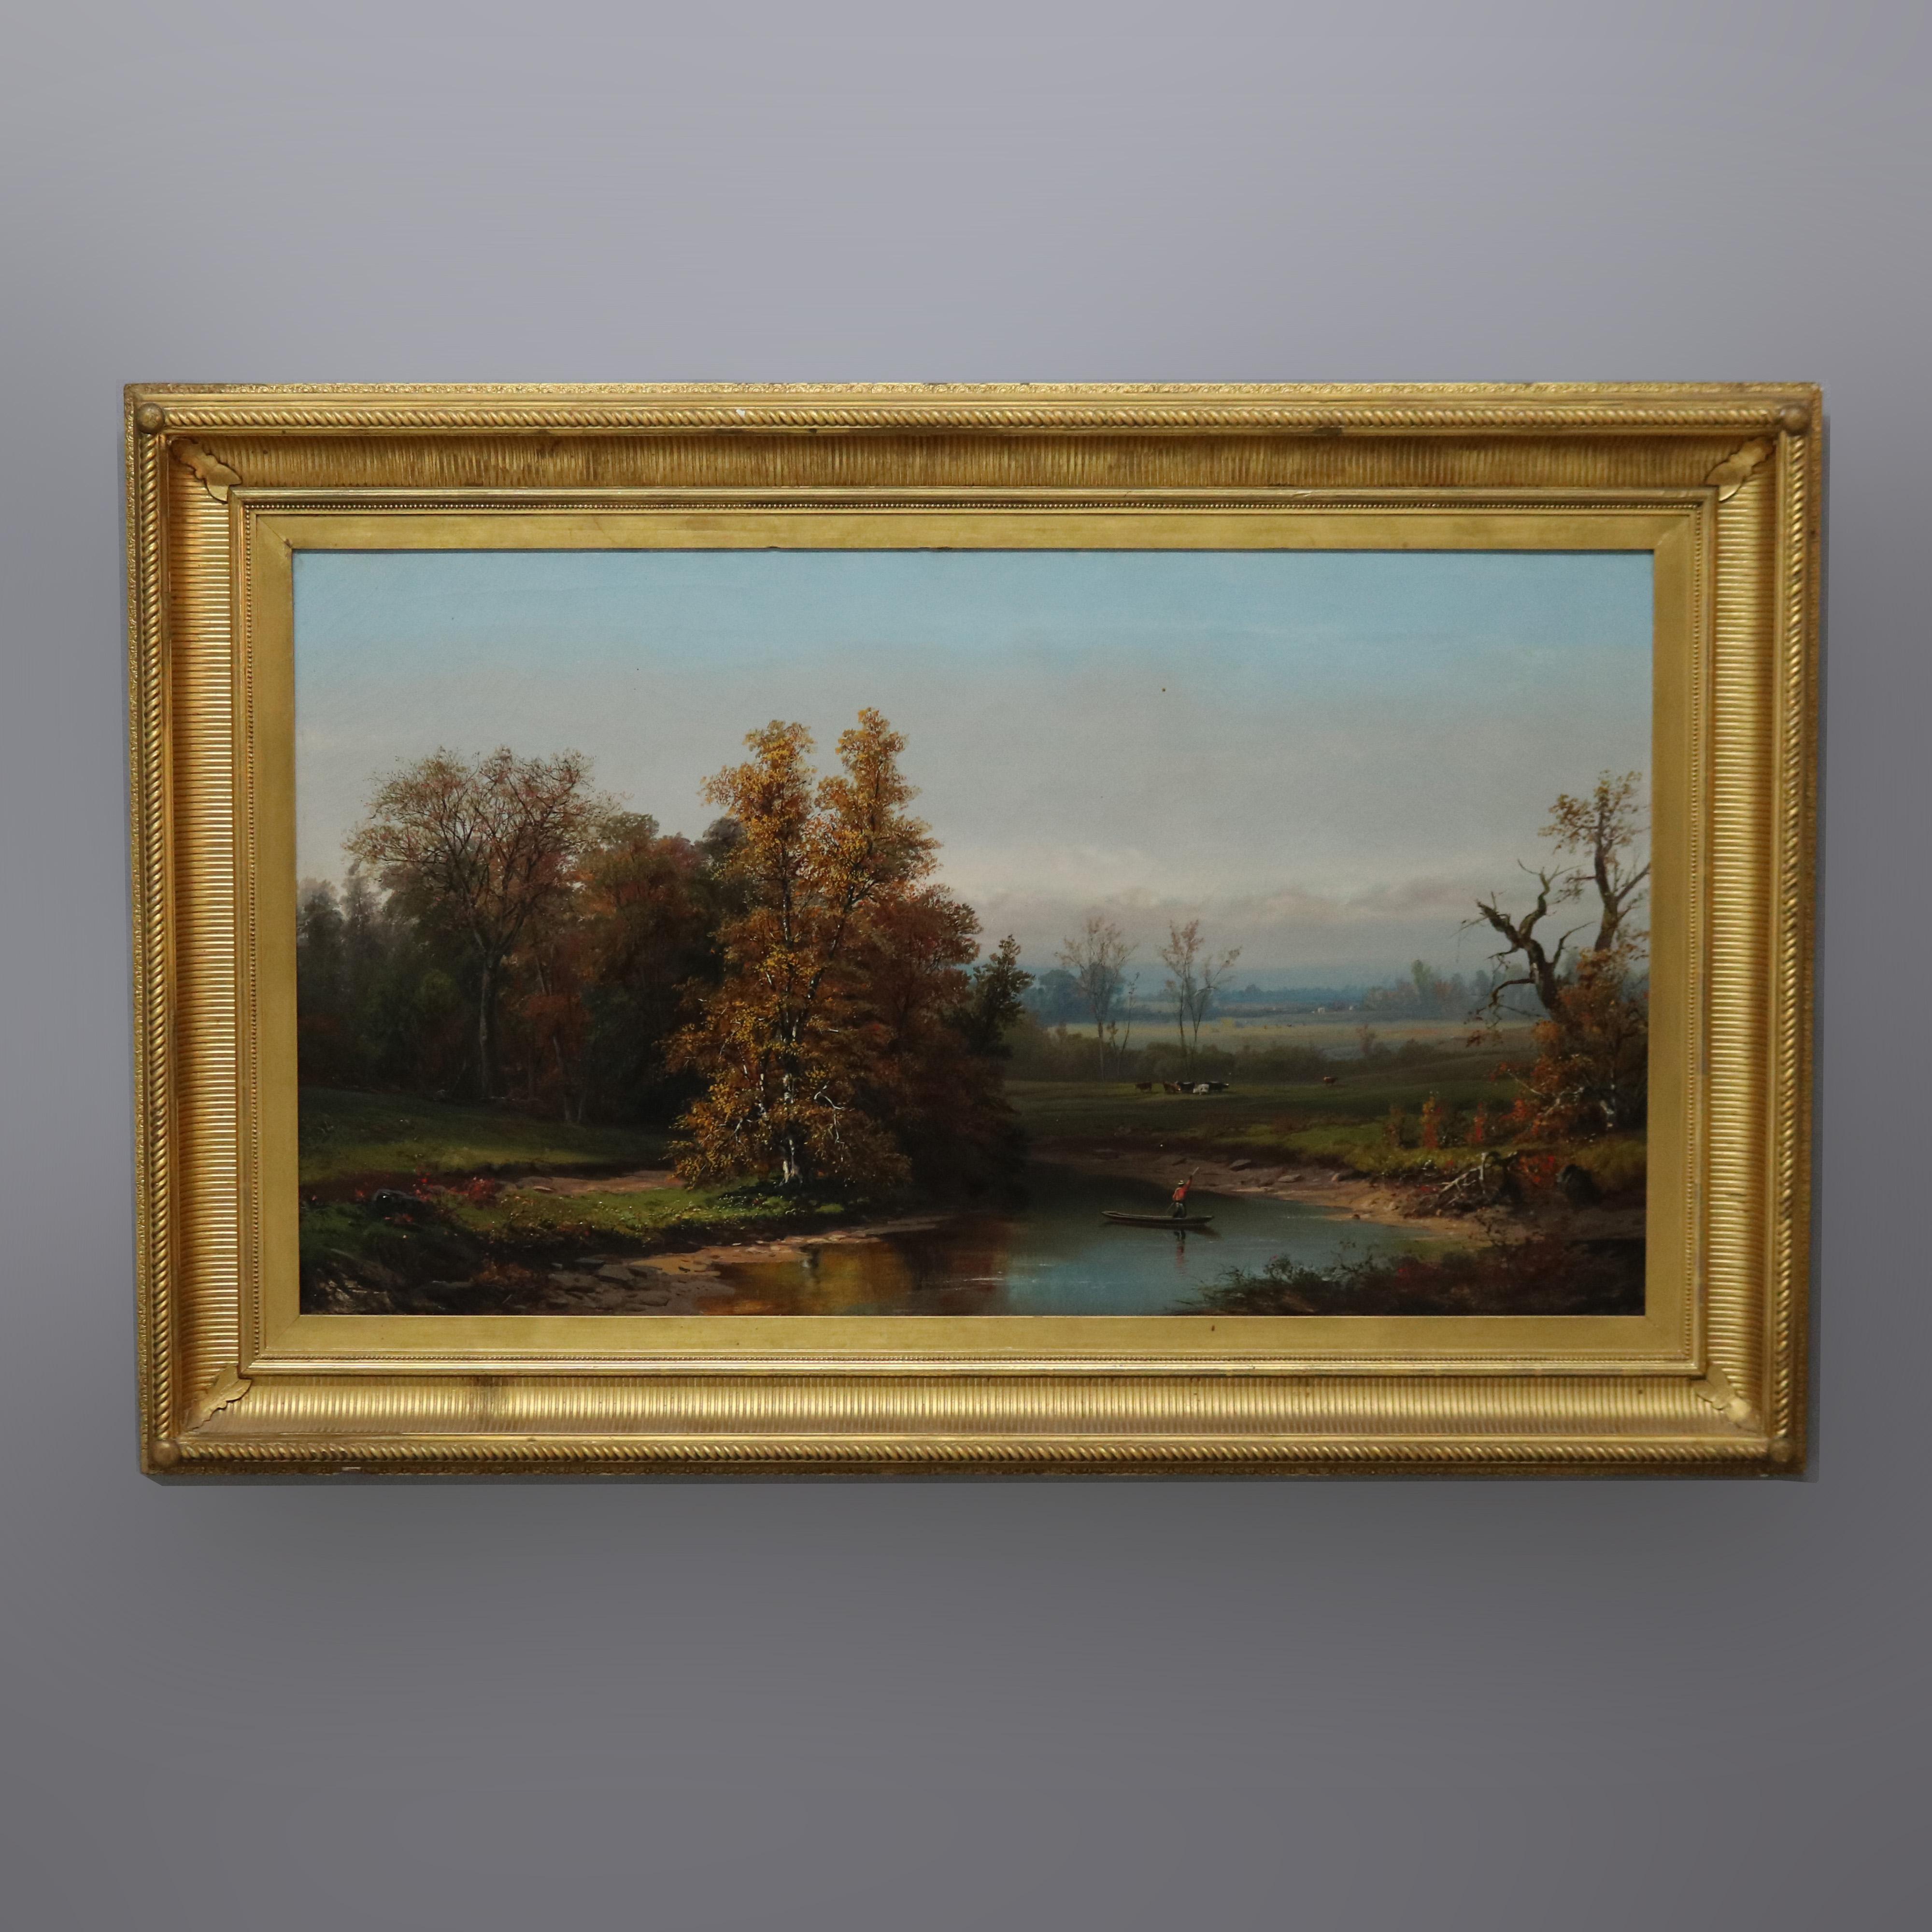 An oversized antique Hudson River School painting by Henry Boese (1824-1863) offers oil on canvas panoramic of New York including river, cattle, boat and figure, artist signed lower left, seated in giltwood frame

Measures- 33.75''H x 51.75''W x